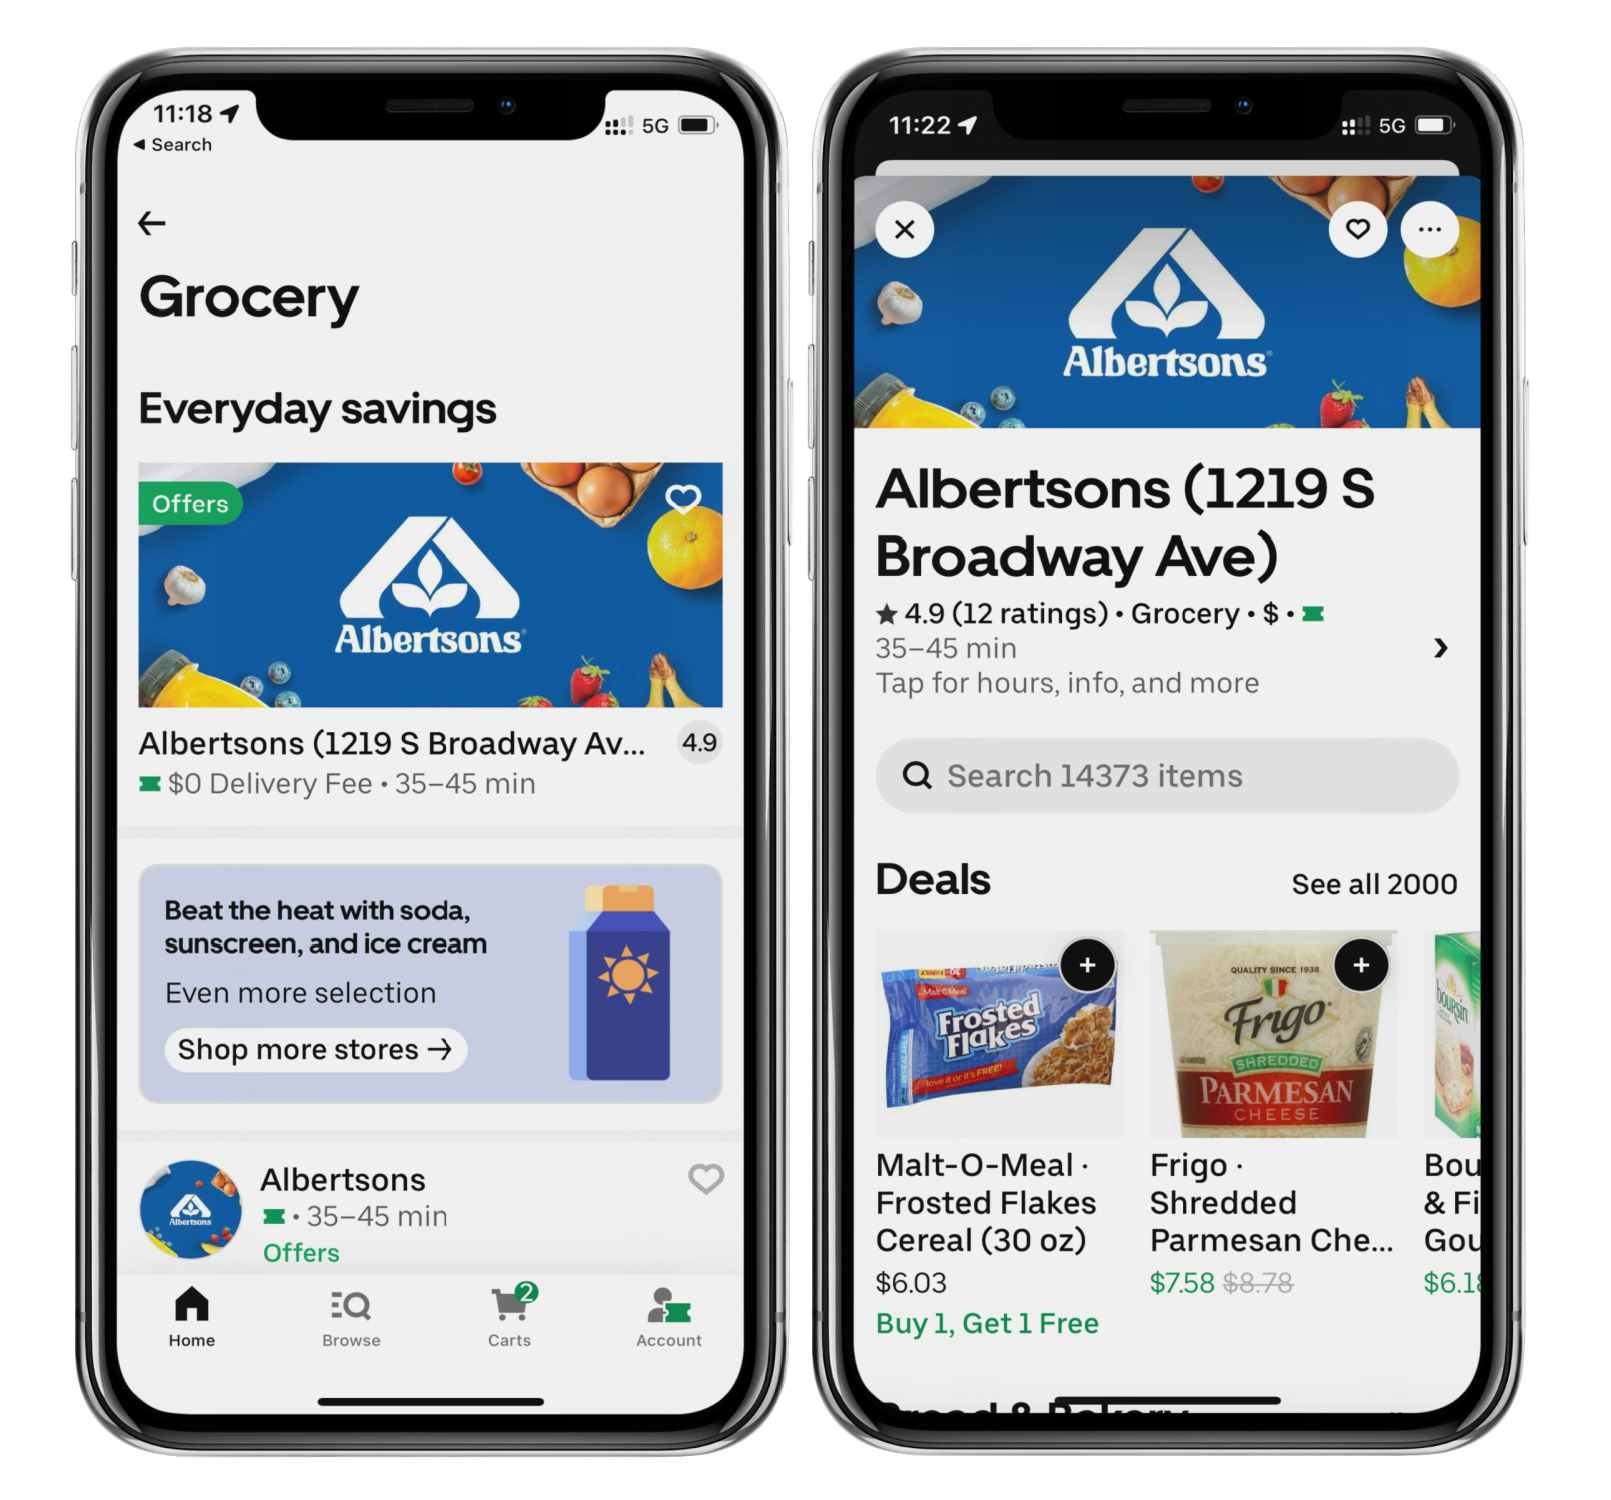 two iphone screenshots side by side showing a list of grocery stores available for uber delivery and the main Albertsons page in the uber eats app